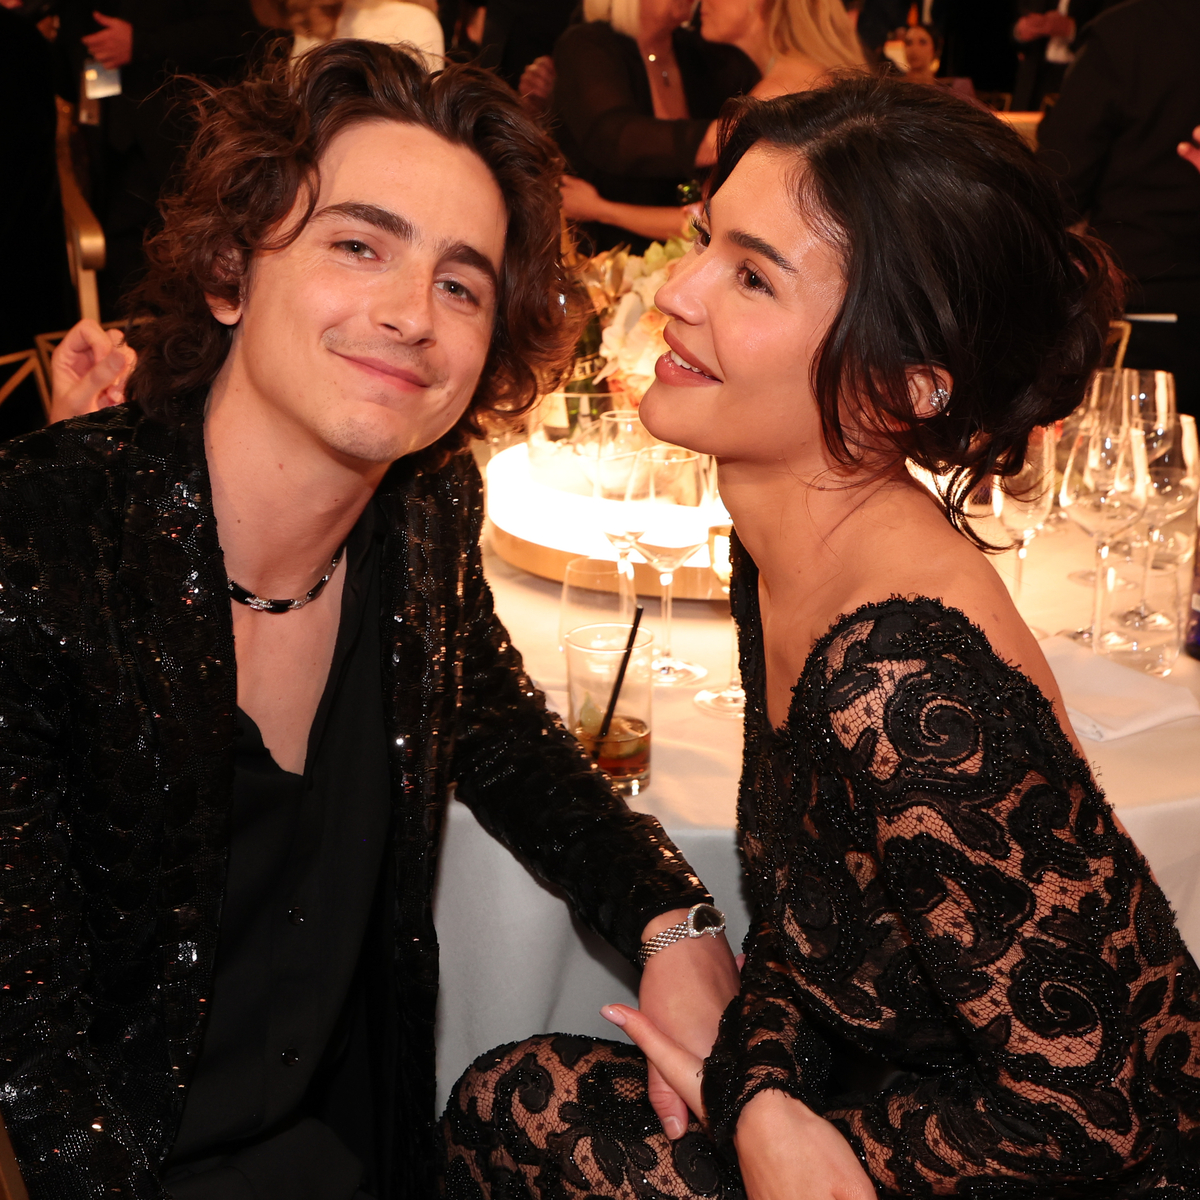 Timothée Chalamet And Kylie Jenner Kiss During Golden Globes Date Night 4307